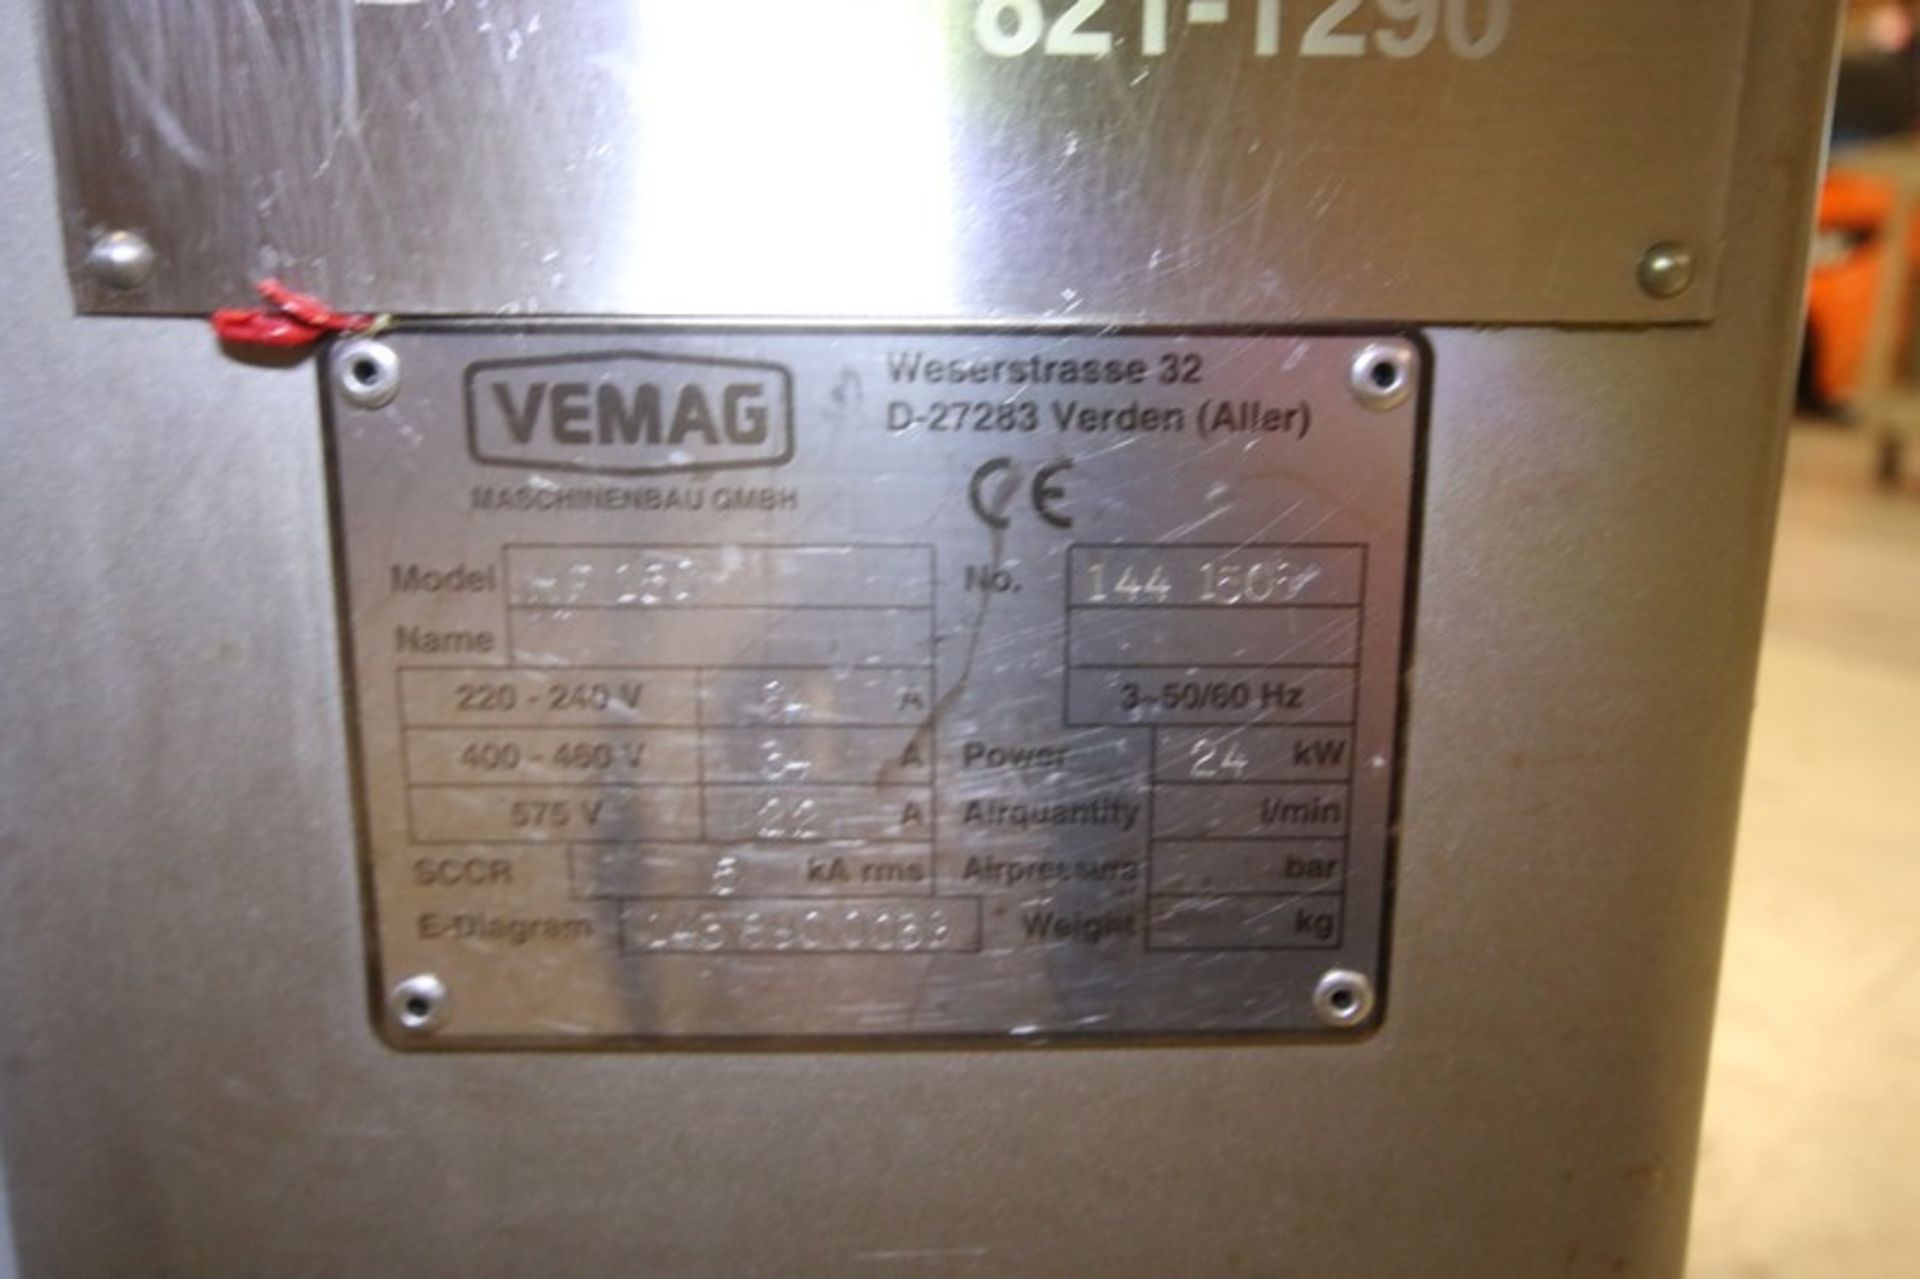 Vemag S/S Vacuum Stuffer, Model Robot HP15C, SN 144 1506, with Double Screws, On Board Tote - Image 8 of 11